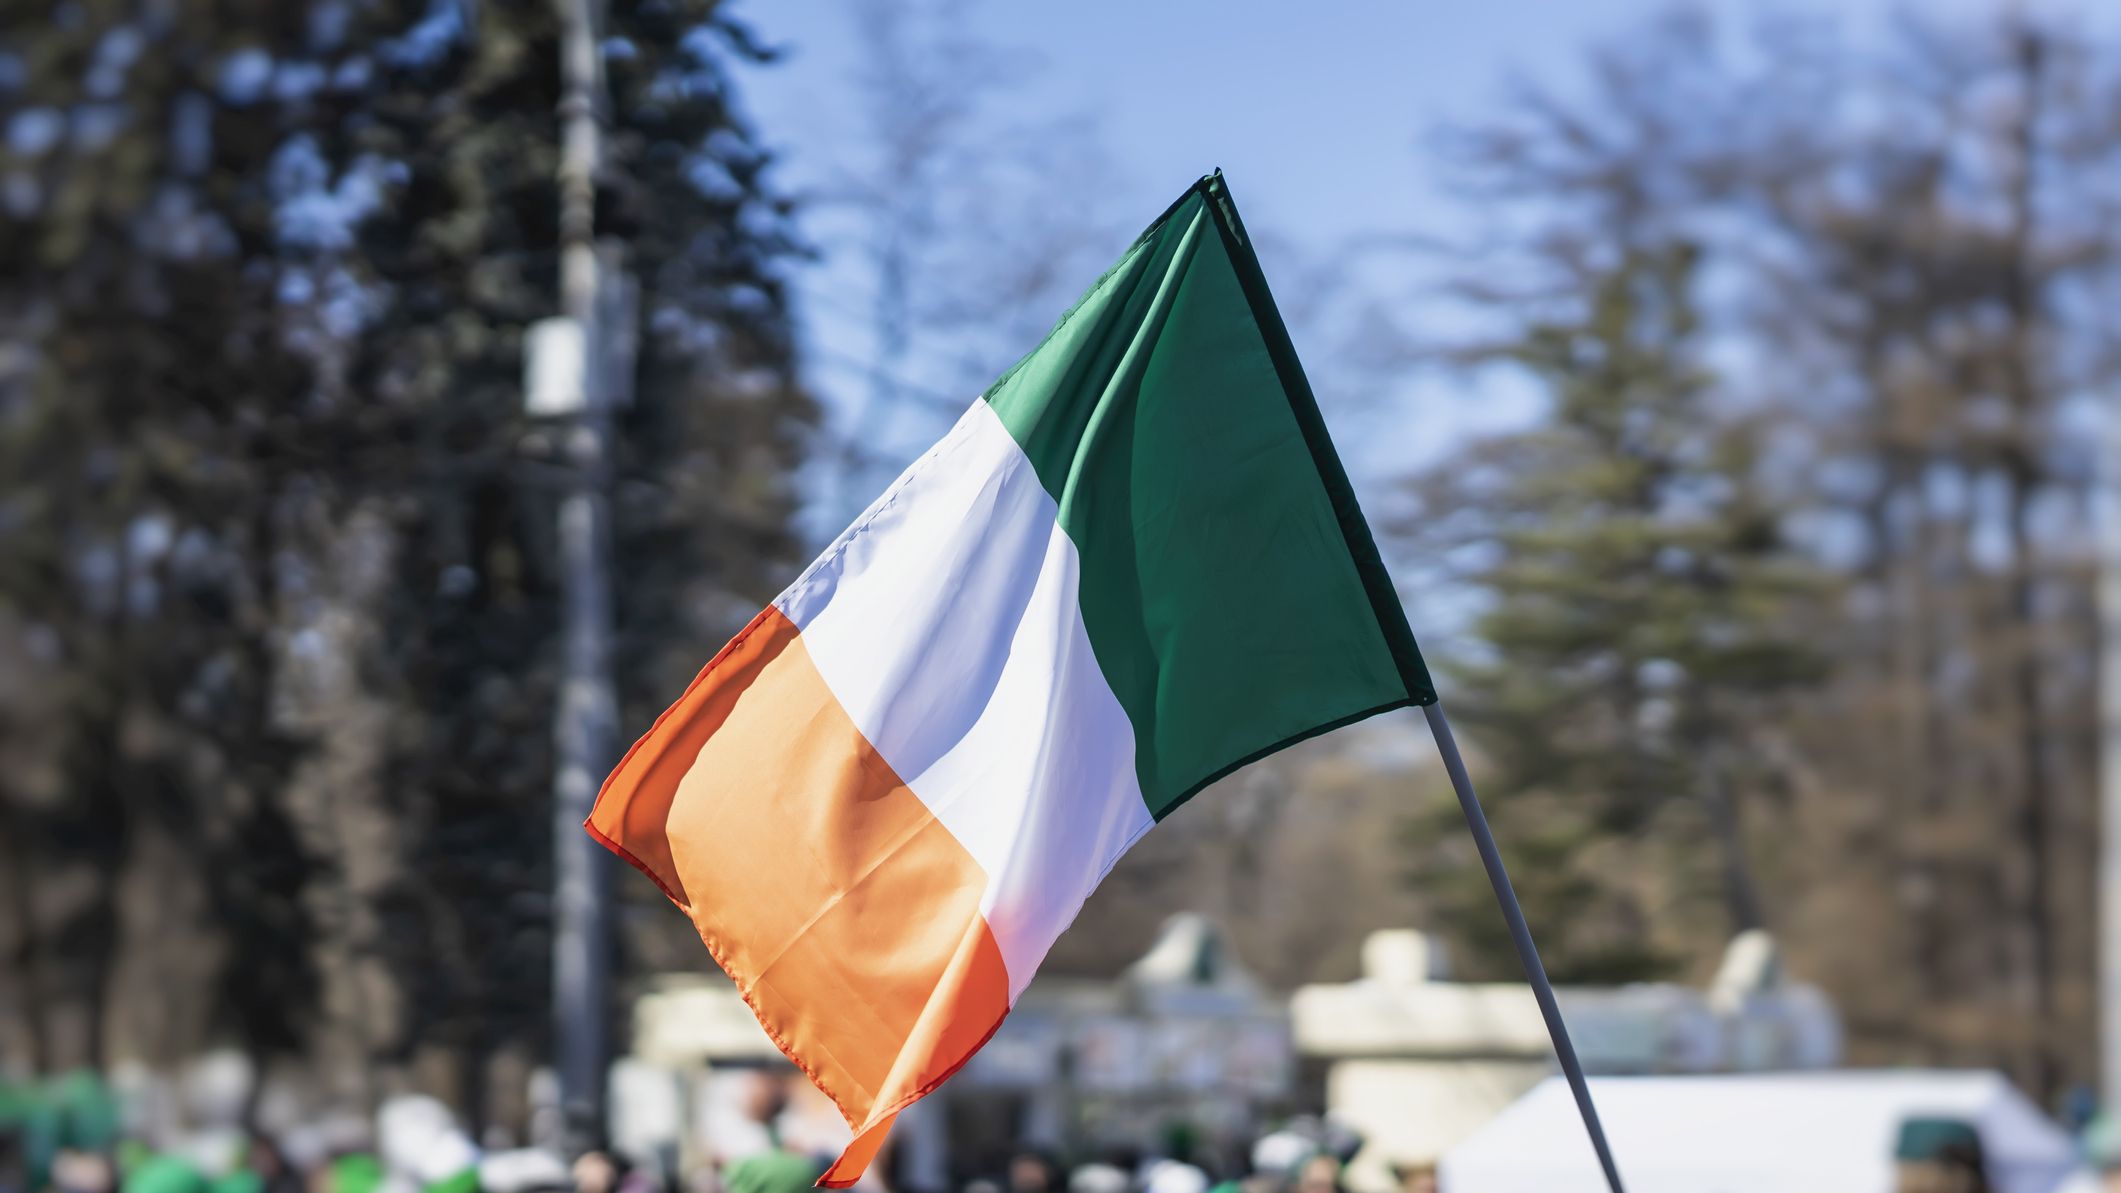 What Is St. Patrick's Day? The History of the March 17 Holiday